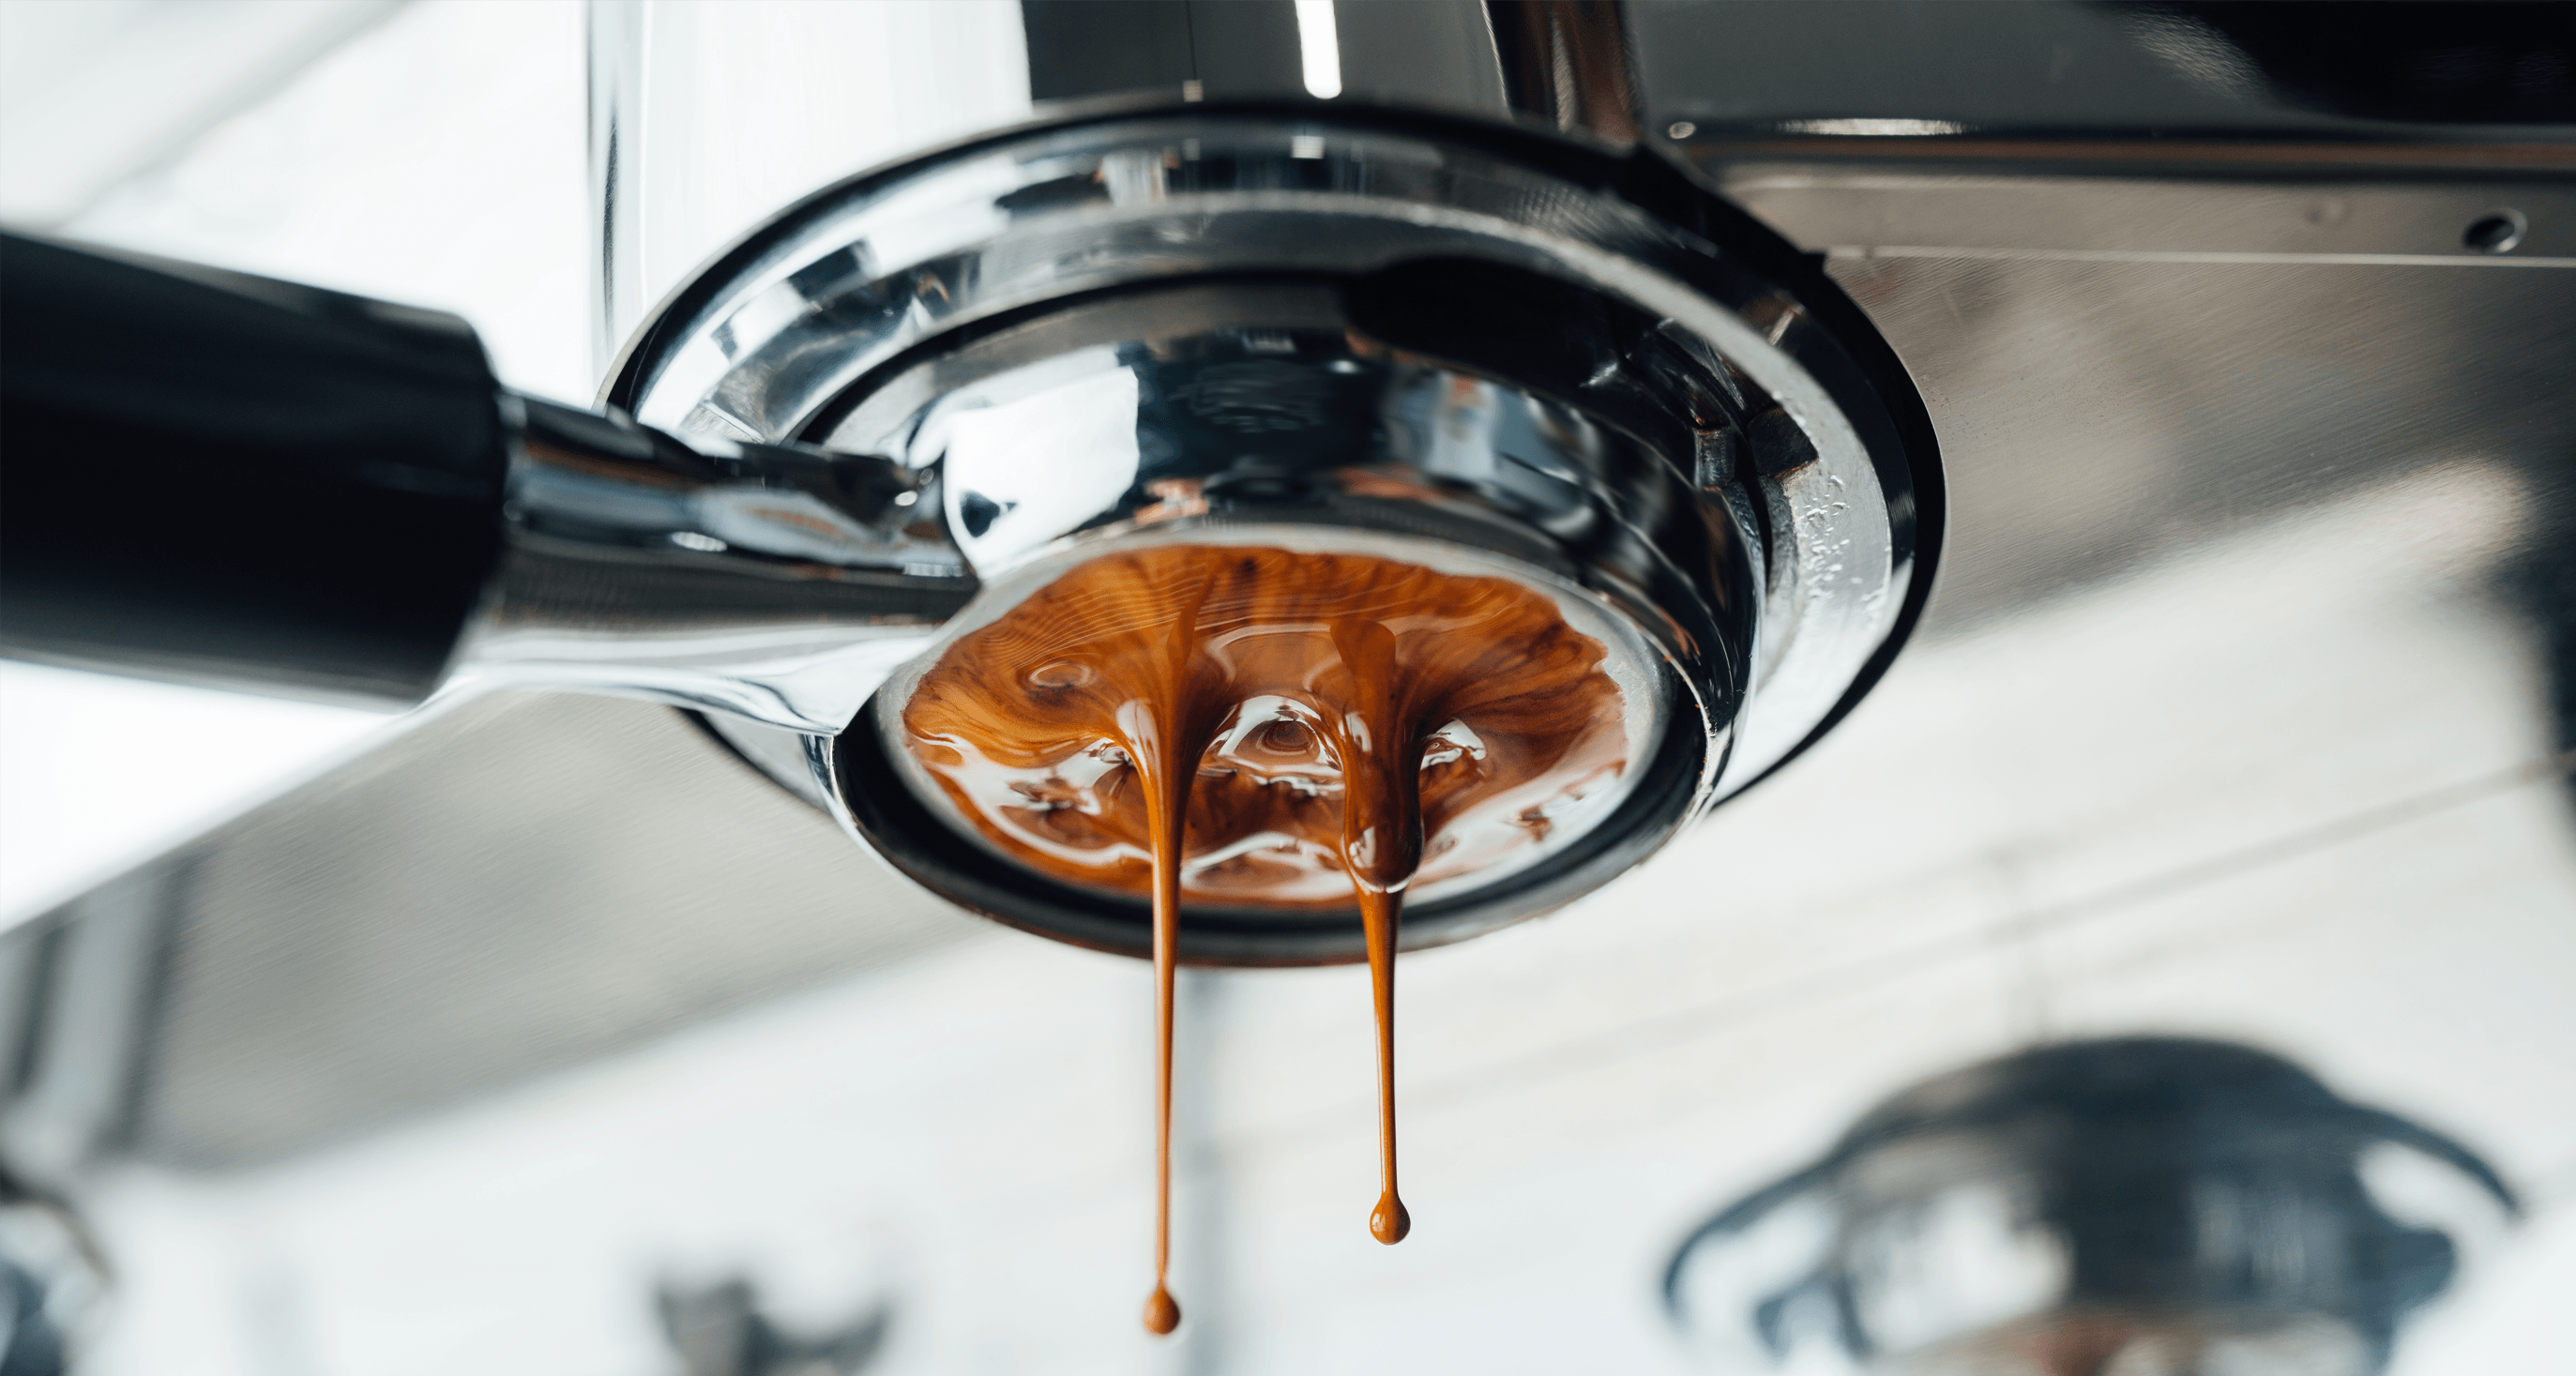 Coffee being extracted from coffee machine